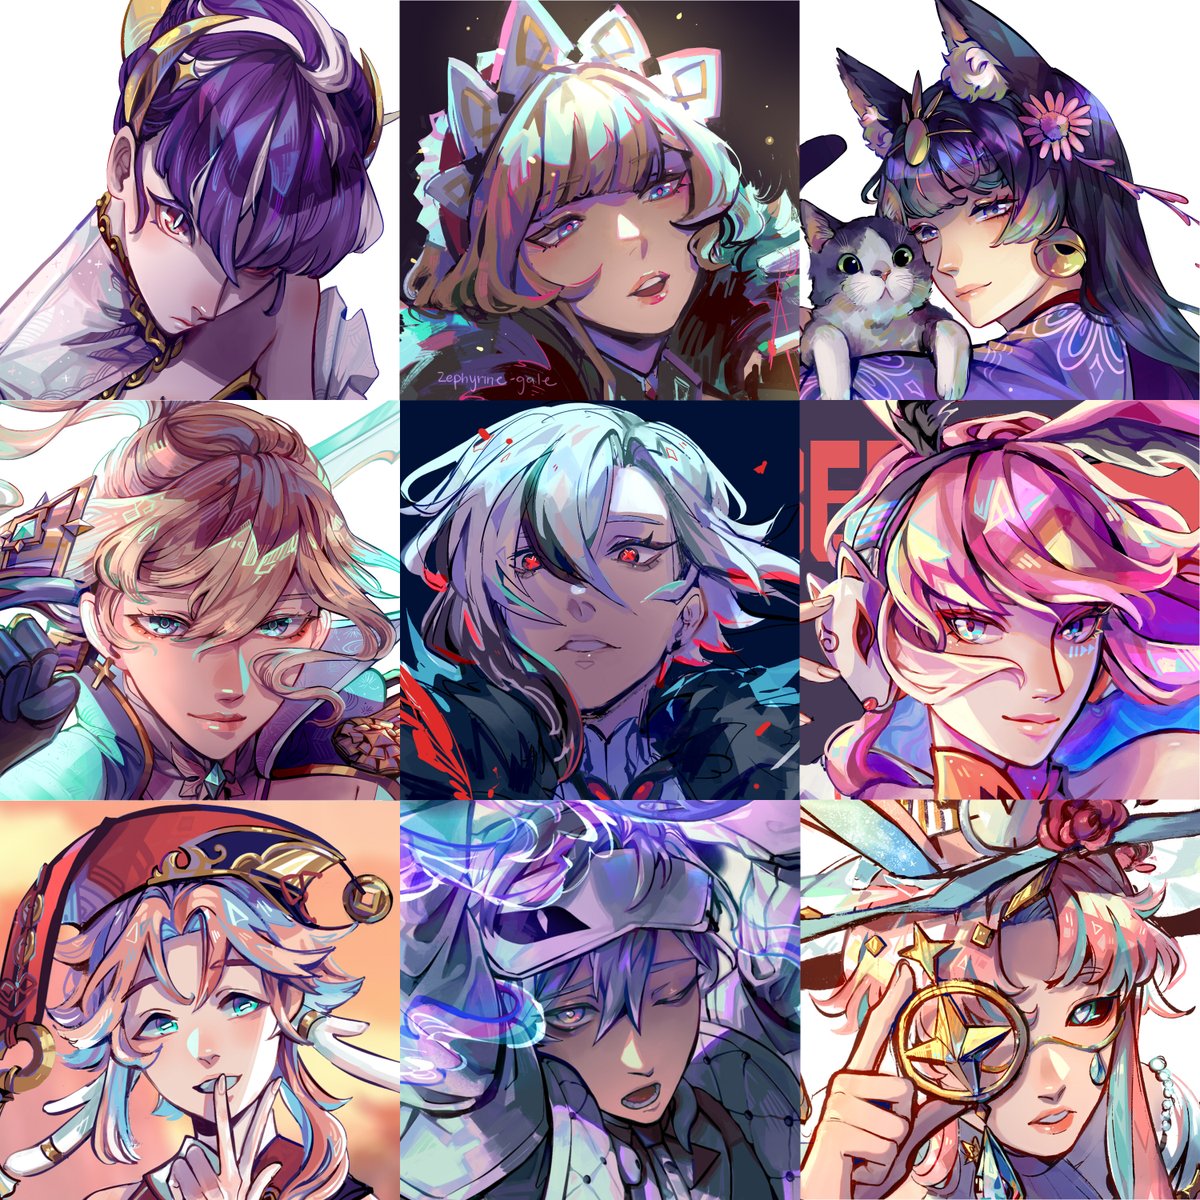 「#faceyourart this looked fun :> 」|zeph | Packing Orders!のイラスト